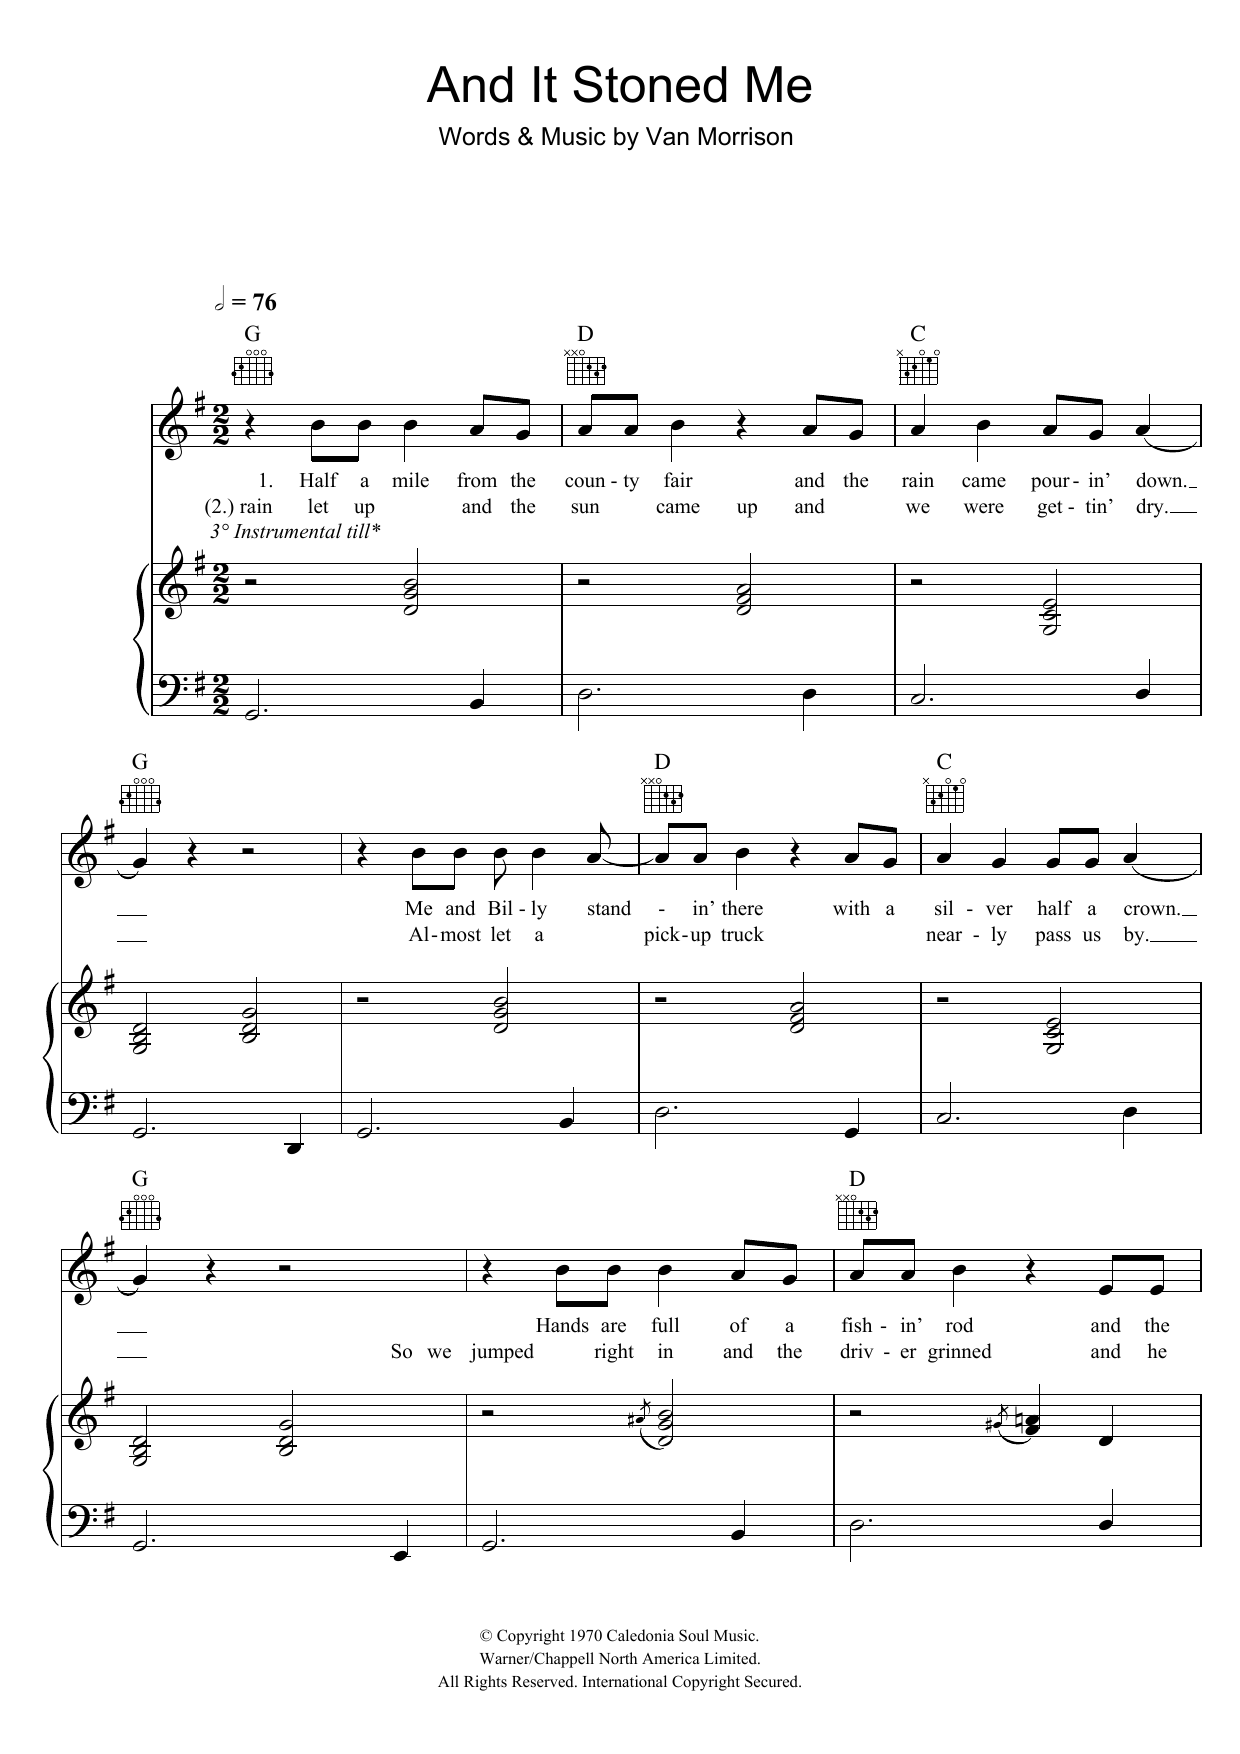 Download Van Morrison And It Stoned Me Sheet Music